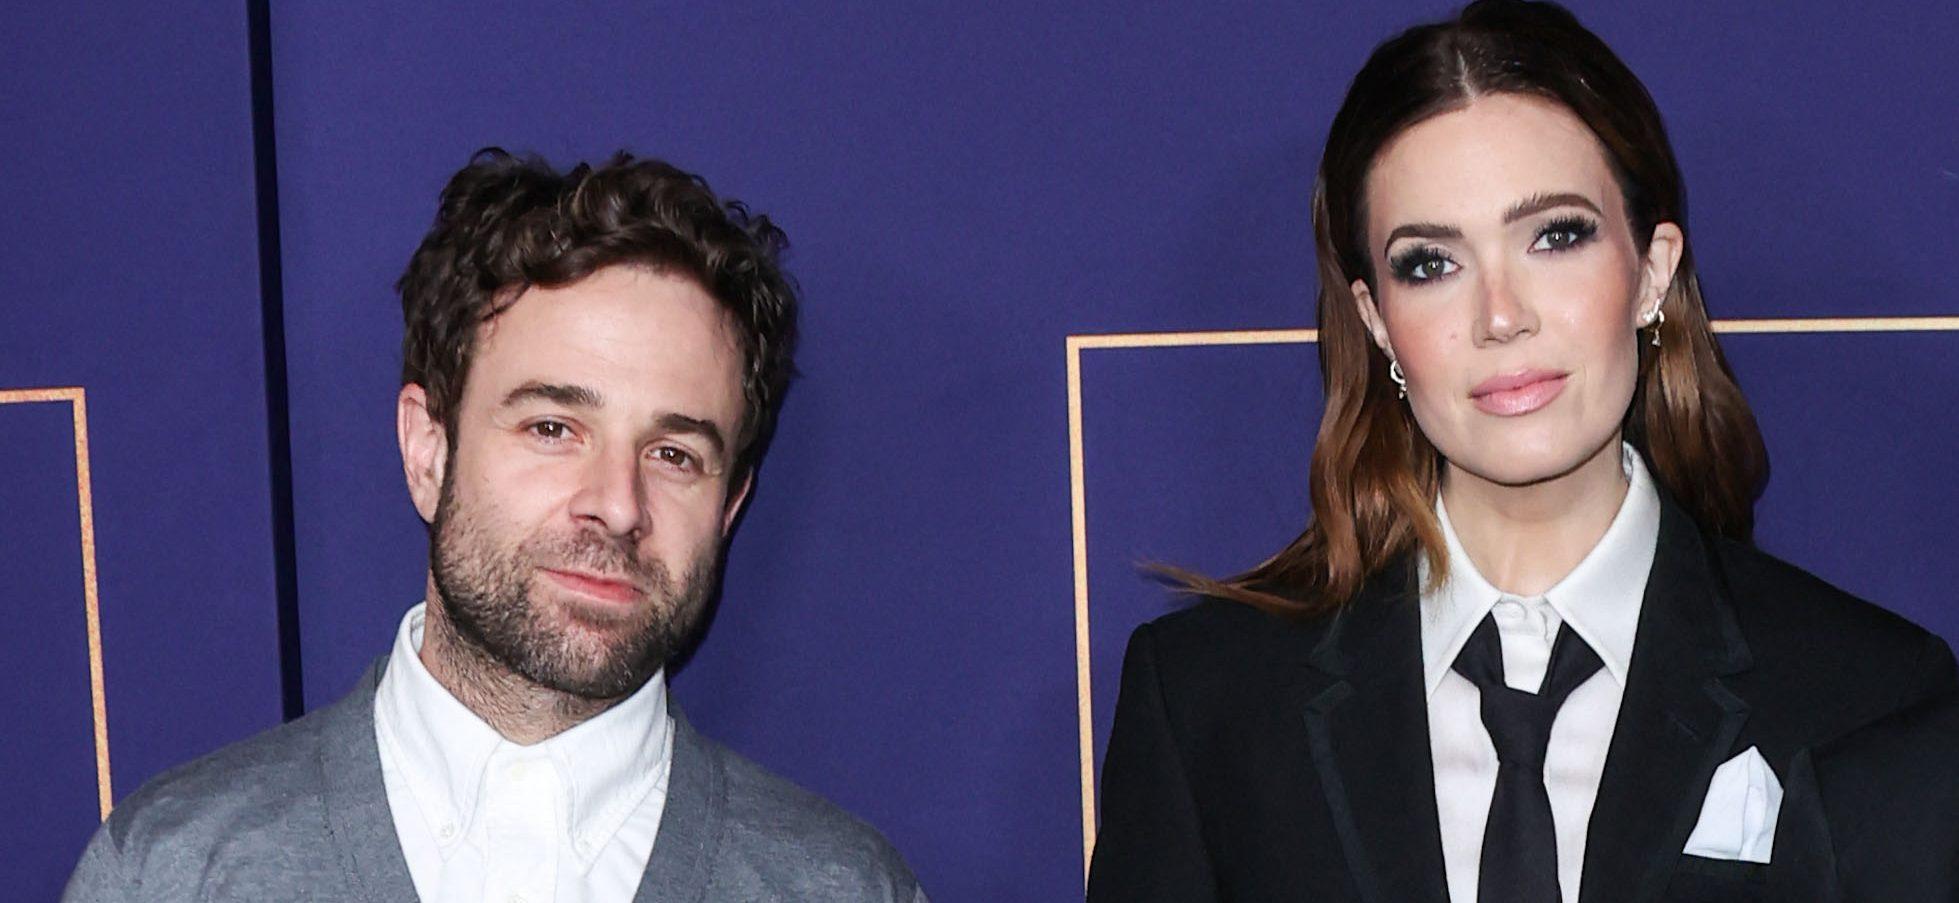 Mandy Moore and husband Taylor Goldsmith arrive at NBCUniversal's FYC House Closing Night Music Event